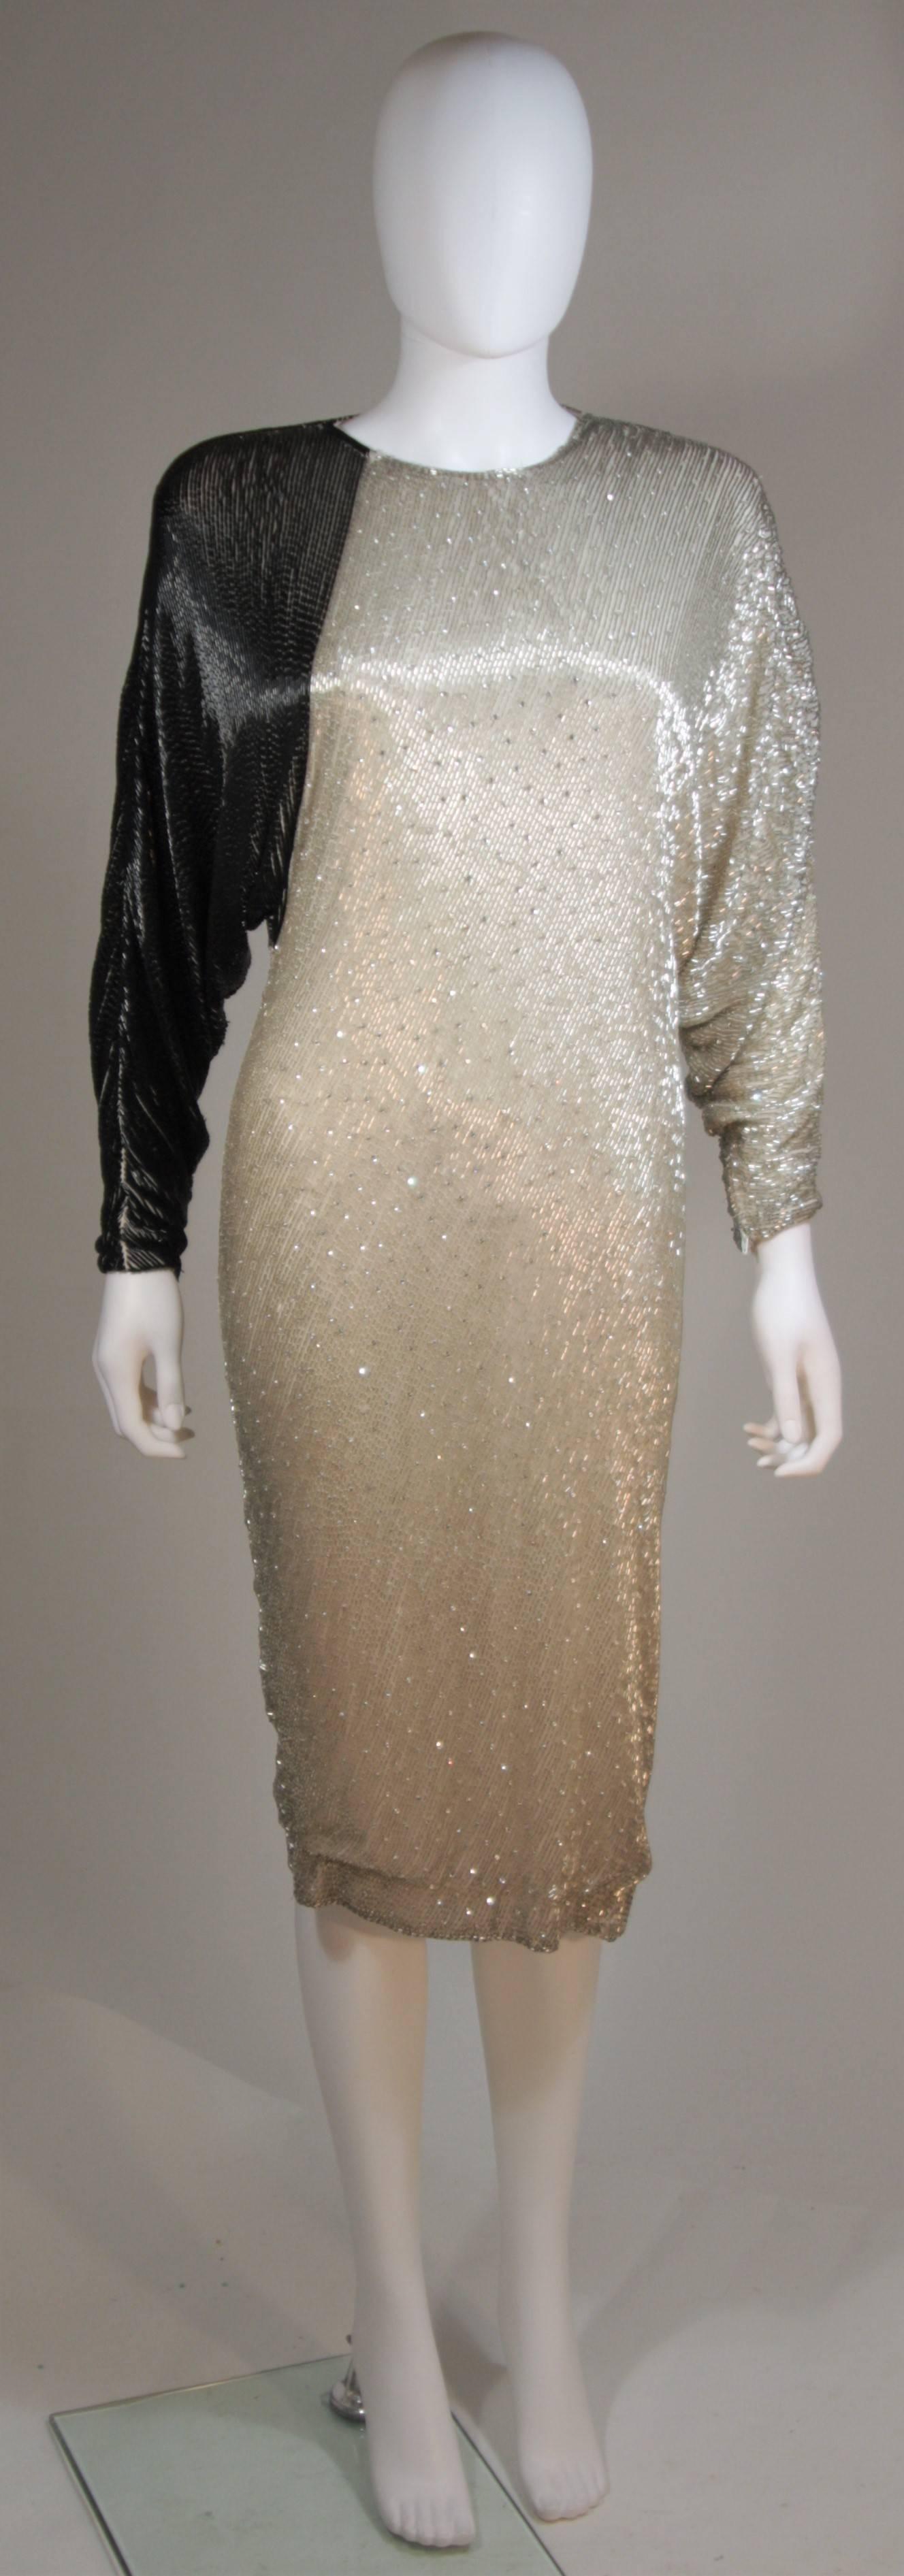  This vintage cocktail dress is composed of a beaded silk with a silver and black combination. This dress features batwing sleeve and a center back zipper closure. In great vintage condition, a few missing beads. 

  **Please cross-reference